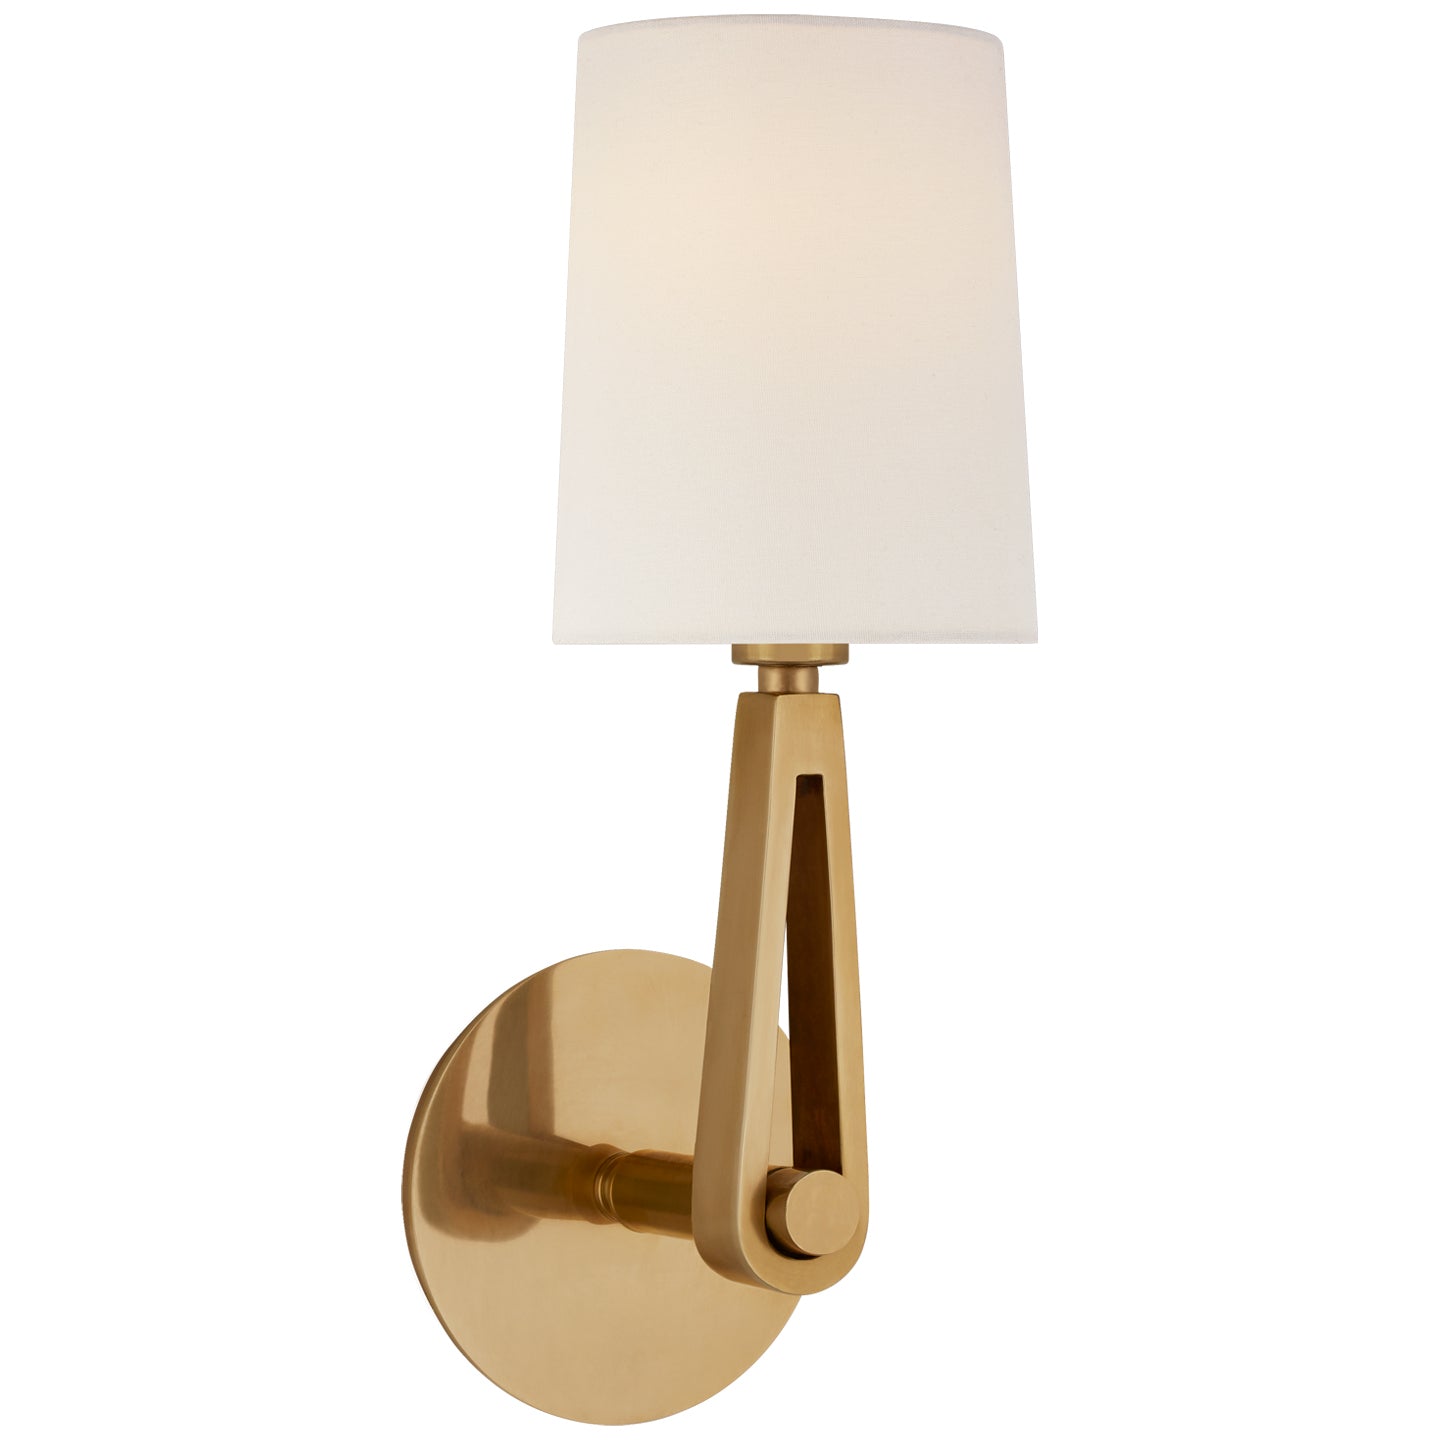 Visual Comfort Signature - TOB 2510HAB-L - One Light Wall Sconce - Alpha - Hand-Rubbed Antique Brass